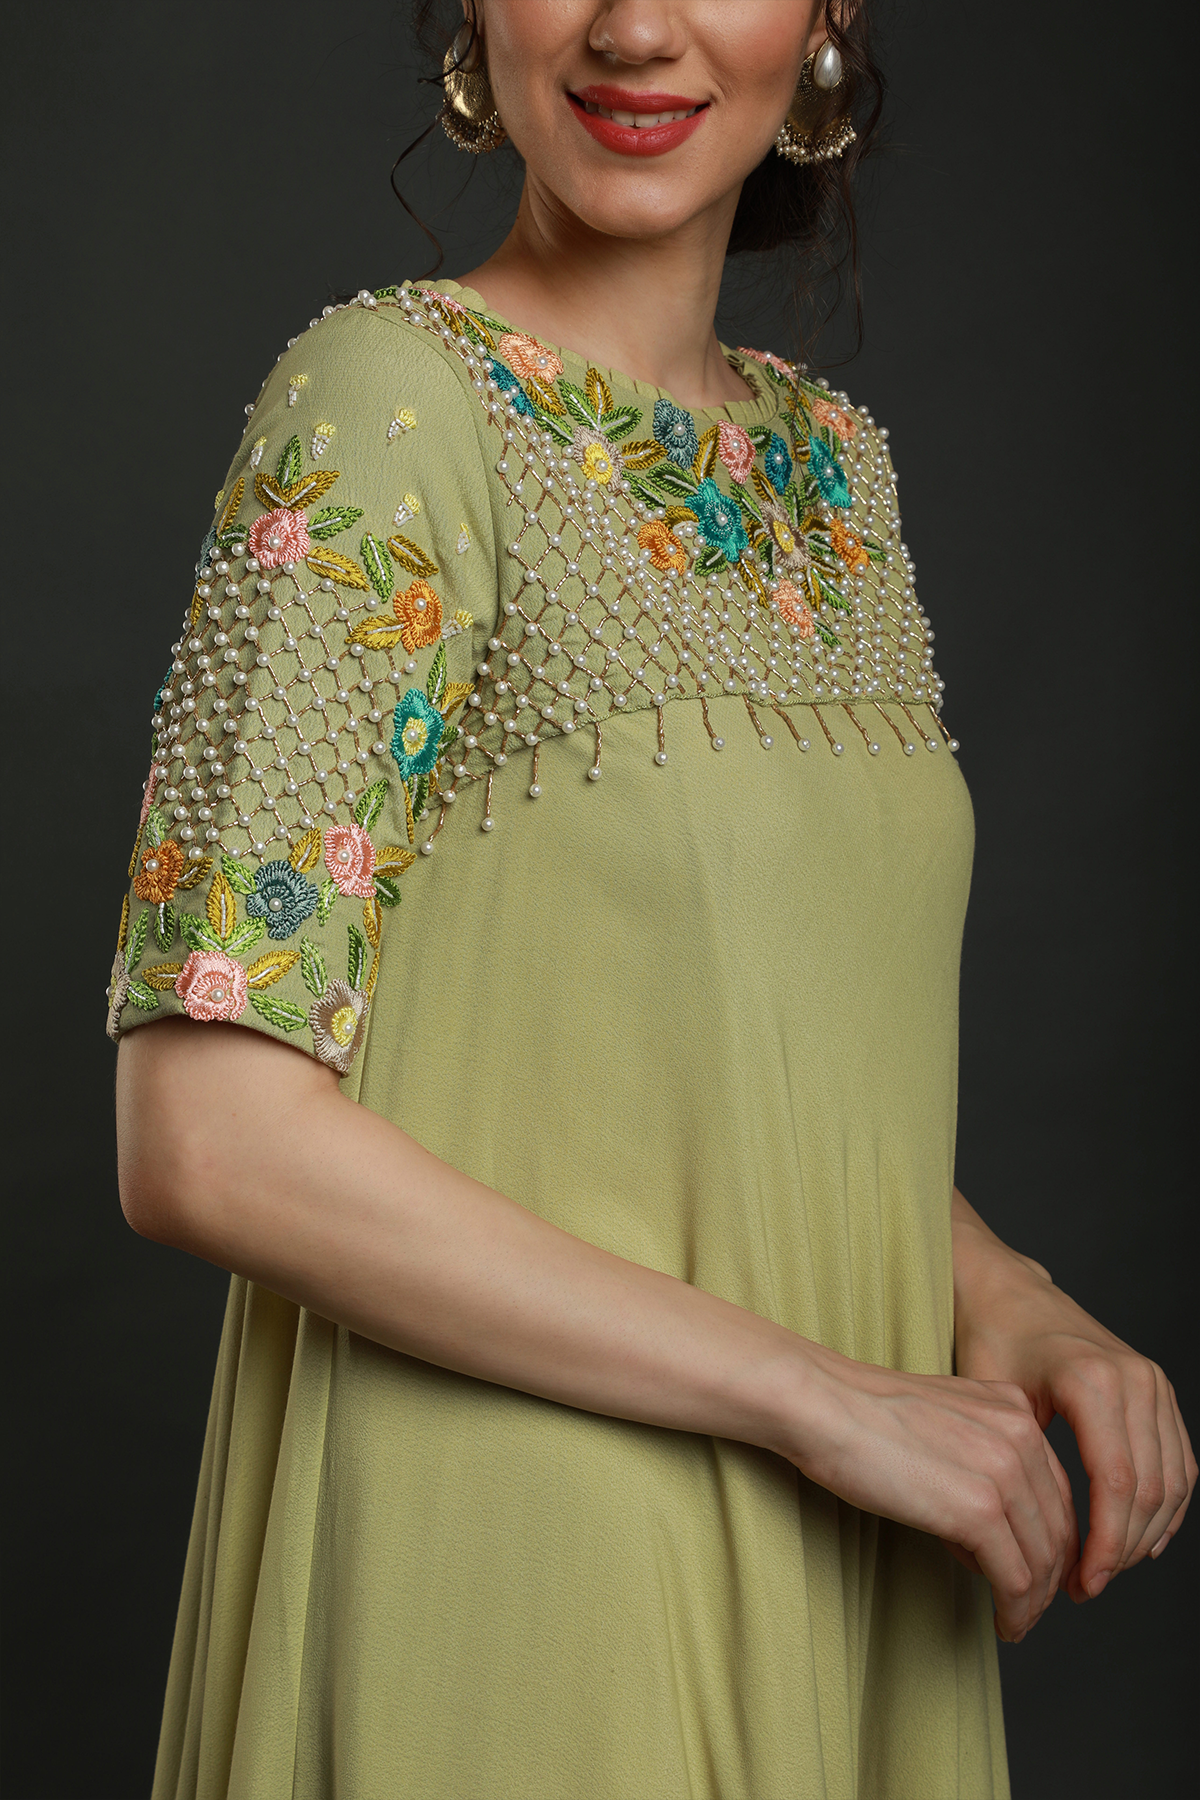 Radiate freshness in our Lime Green Umbrella Dress. Moss crepe with intricate embroidered yoke featuring knot work thread, pearl beads, & cutdana embellishments